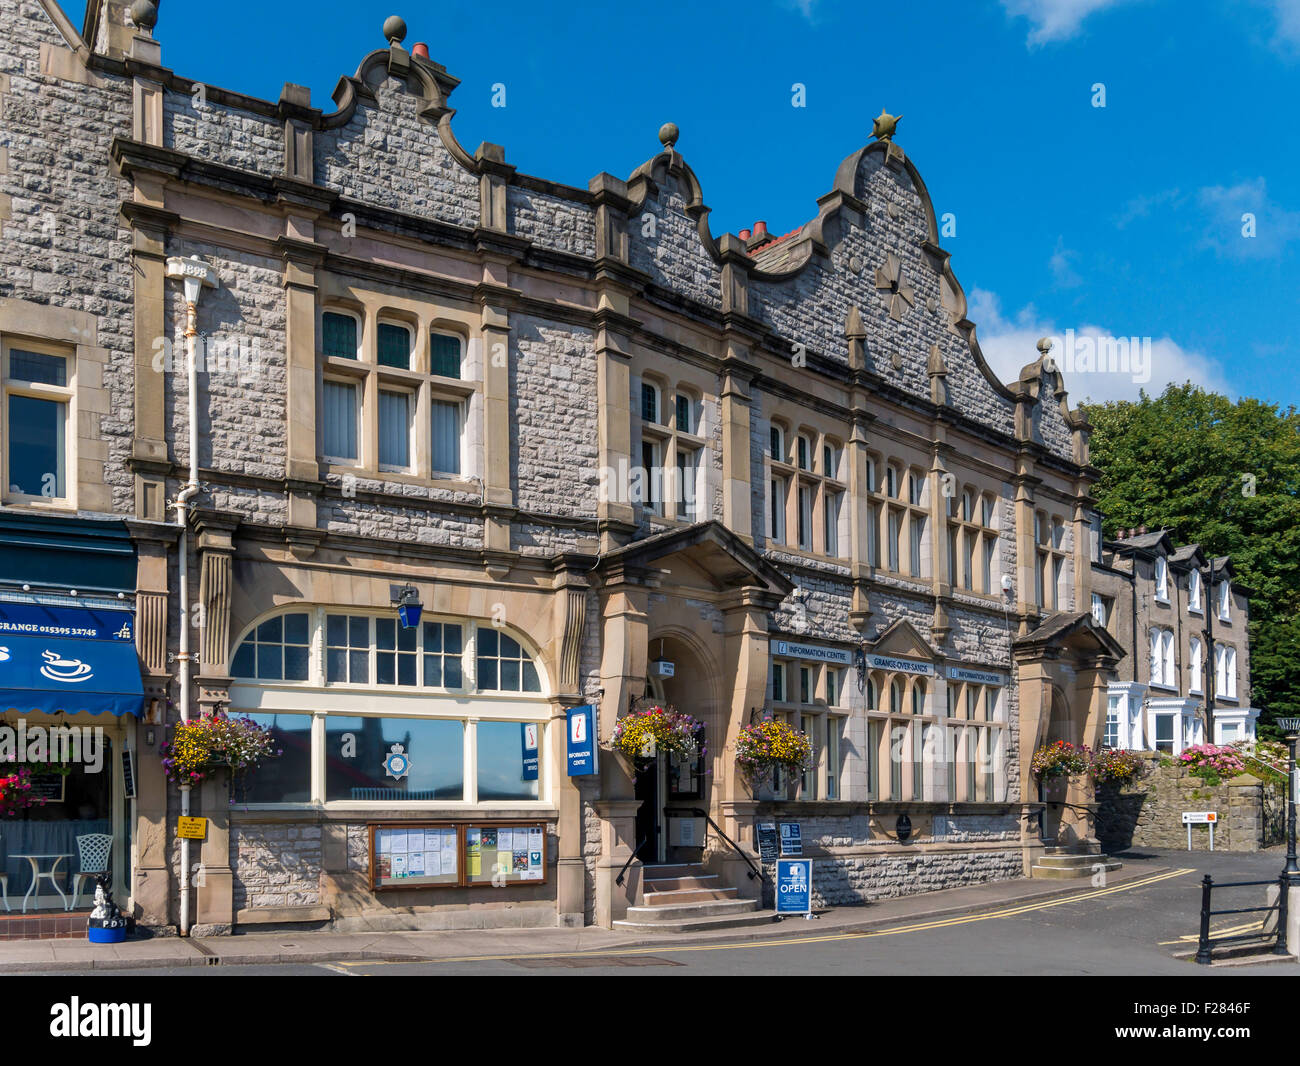 Victoria Hall Main Street Grange over Sands Cumbria built 1898 now the towns Tourist Information Centre Stock Photo